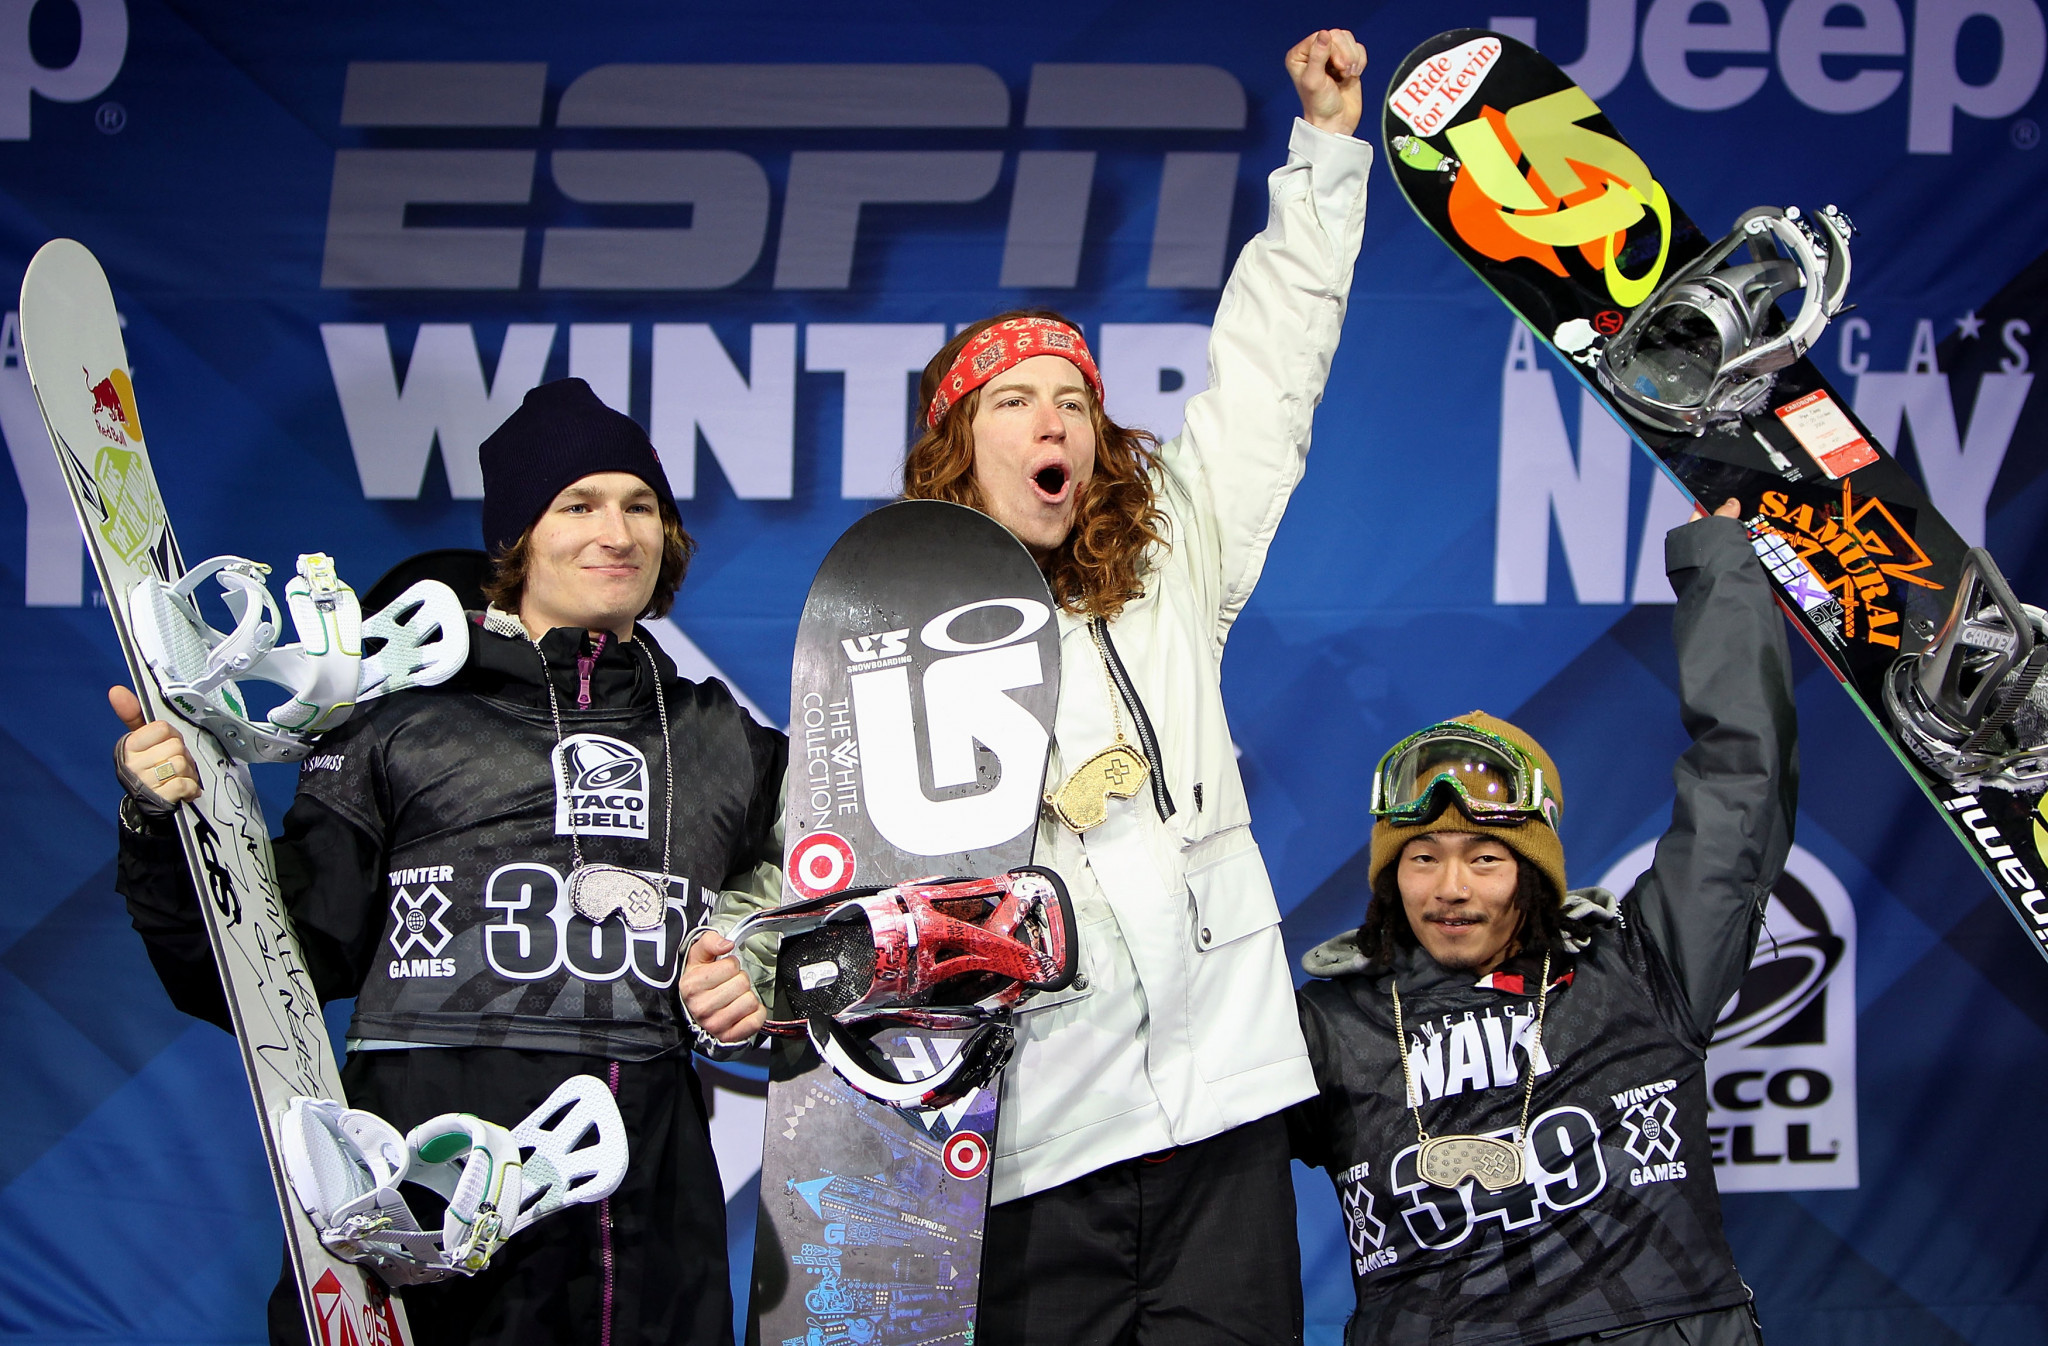 Kazuhiro Kokubo, right, took bronze in the SuperPipe at the 2010 Winter X Games in Aspen ©Getty Images